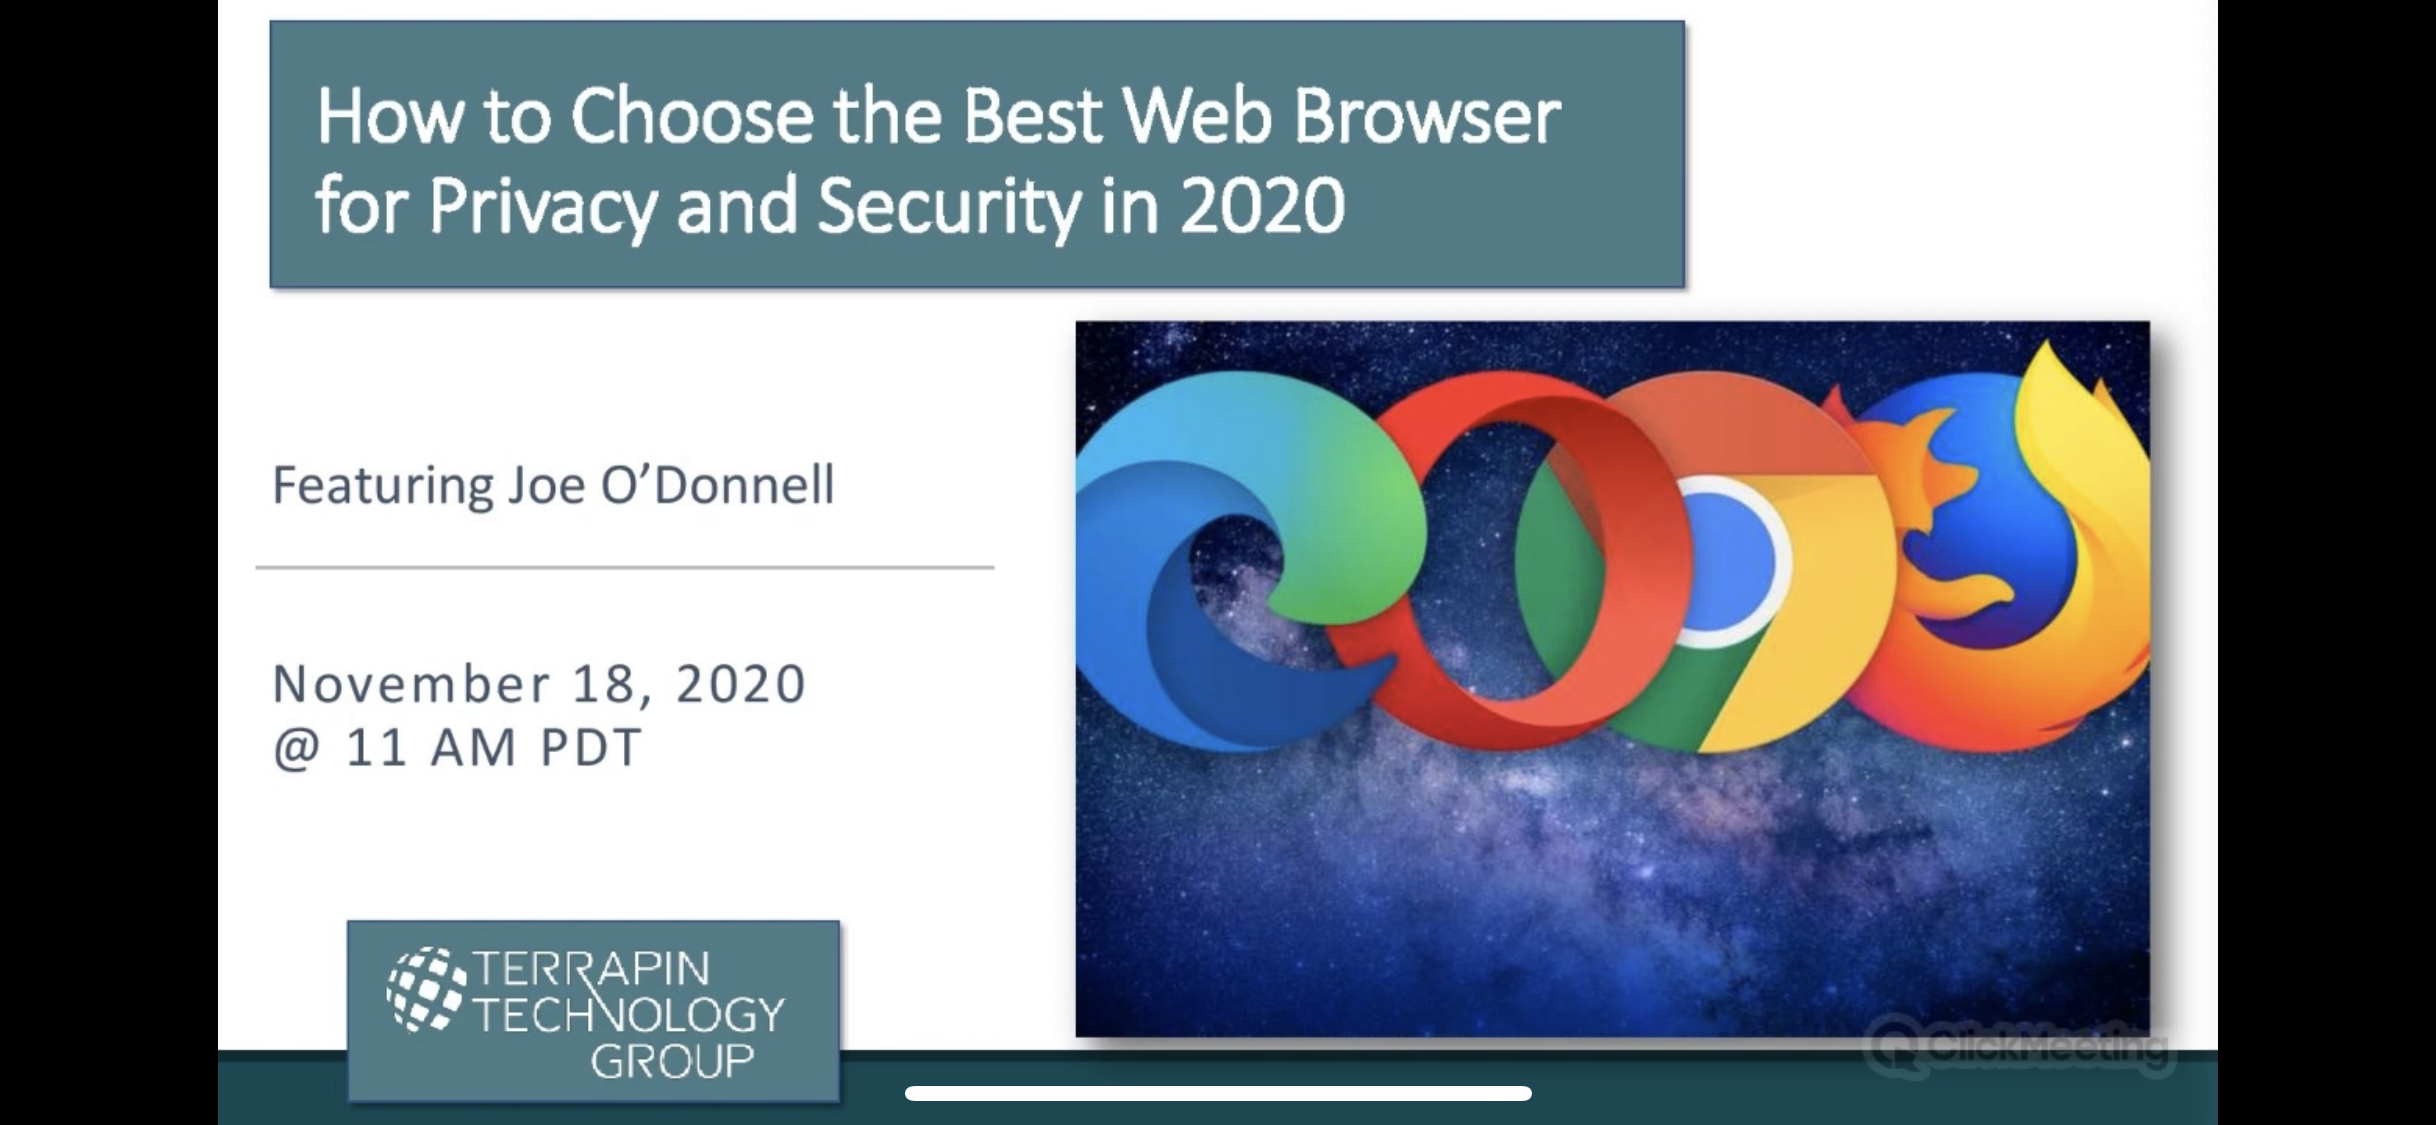 How to Choose the Best Web Browser for Privacy and Security in 2020